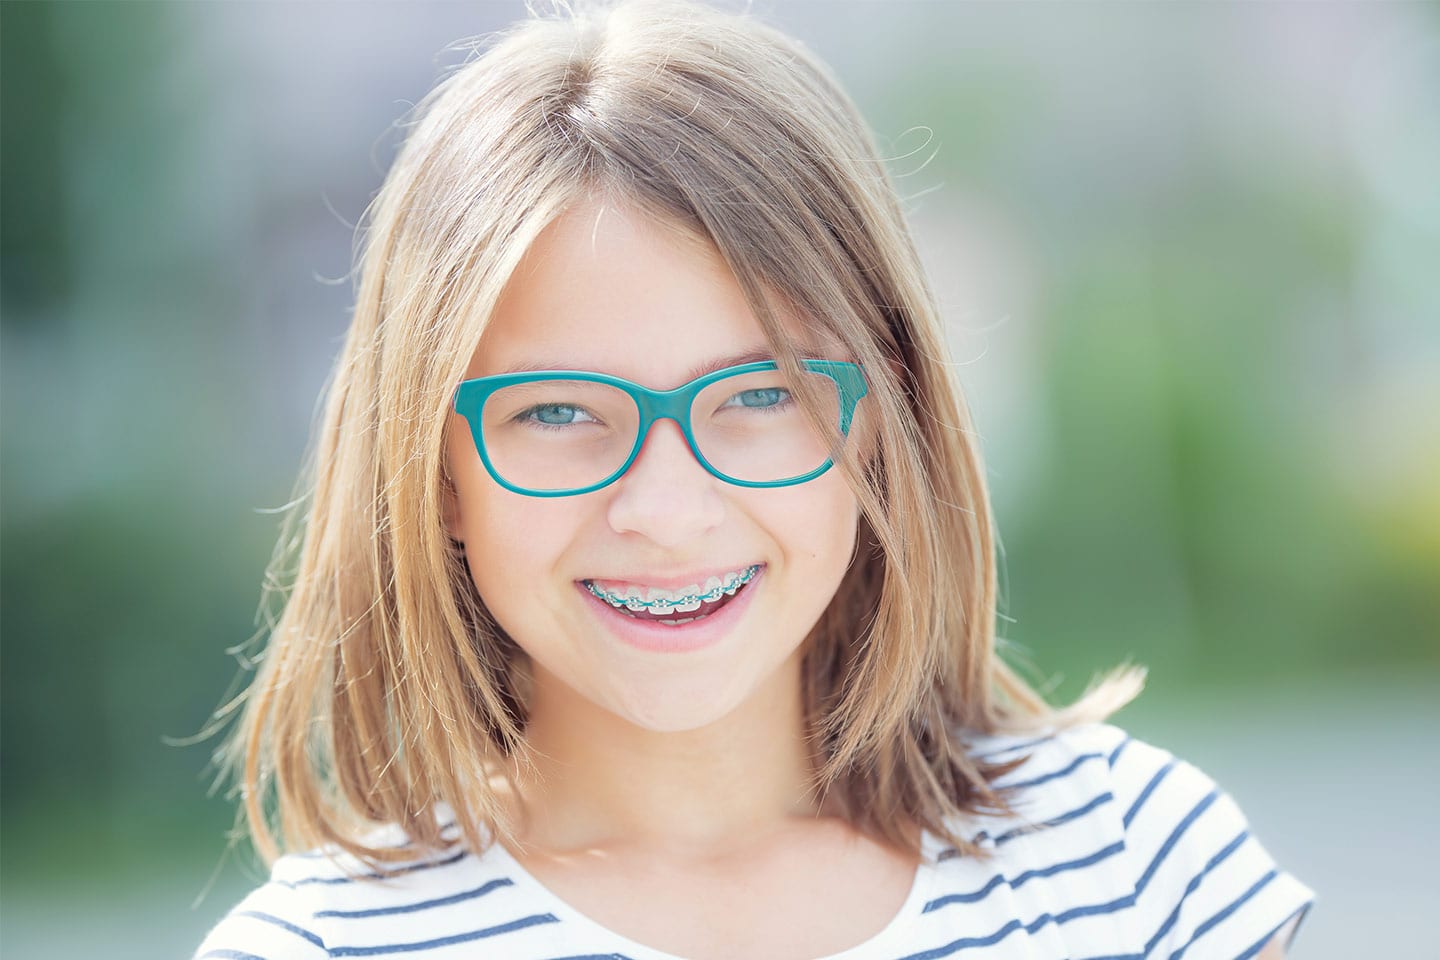 little girl with glasses and braces smiling in chattanooga